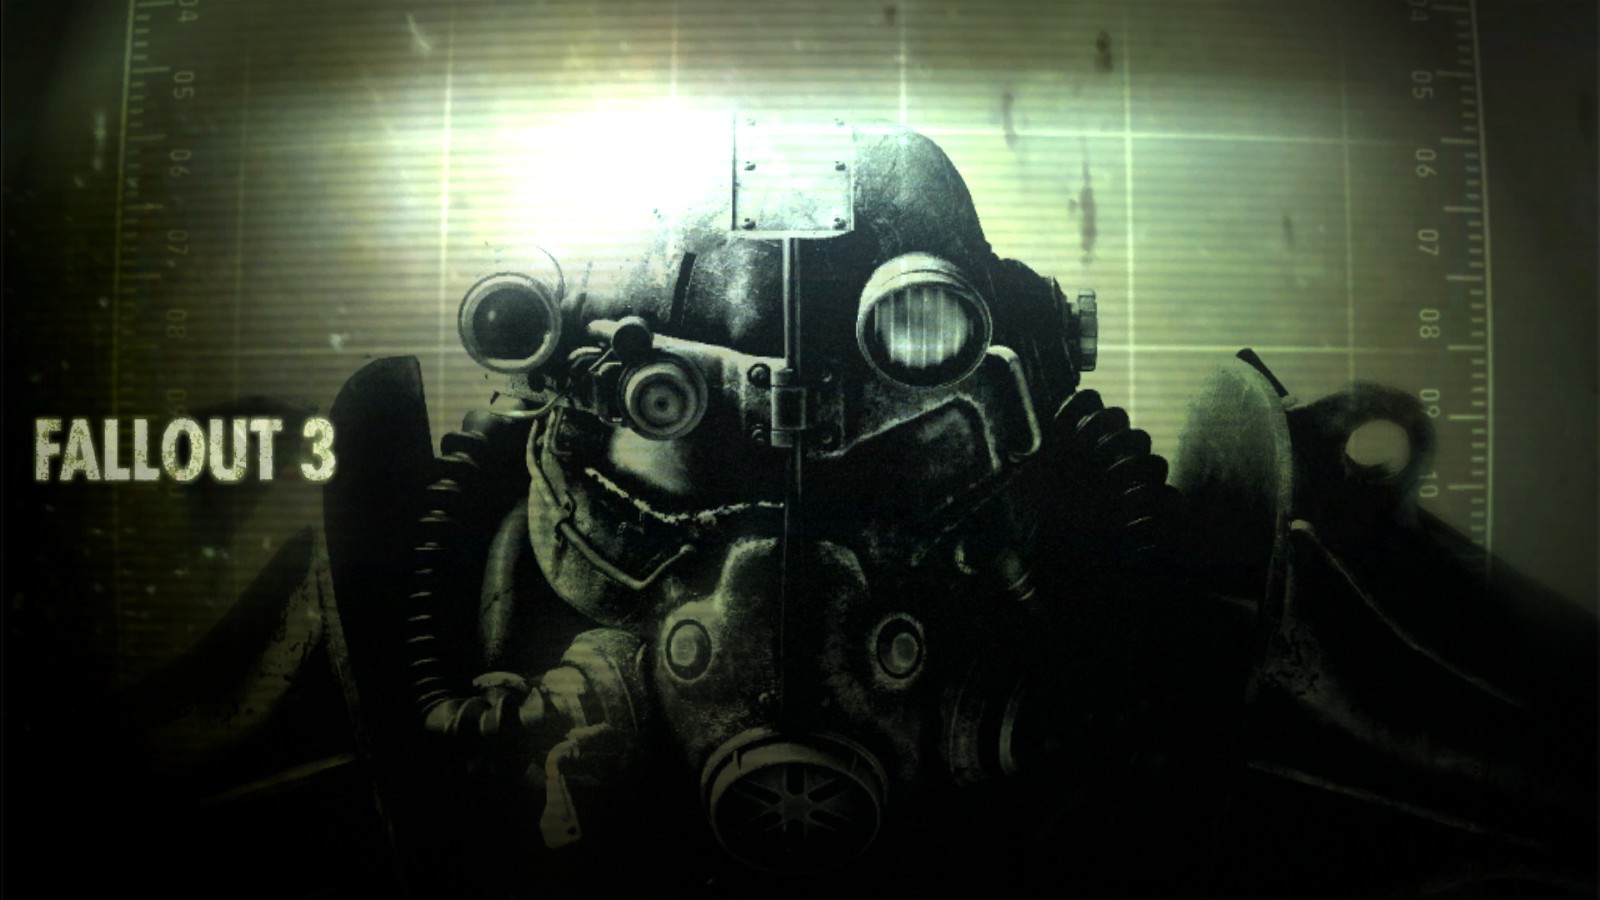 General 1600x900 Fallout Fallout 3 video games PC gaming